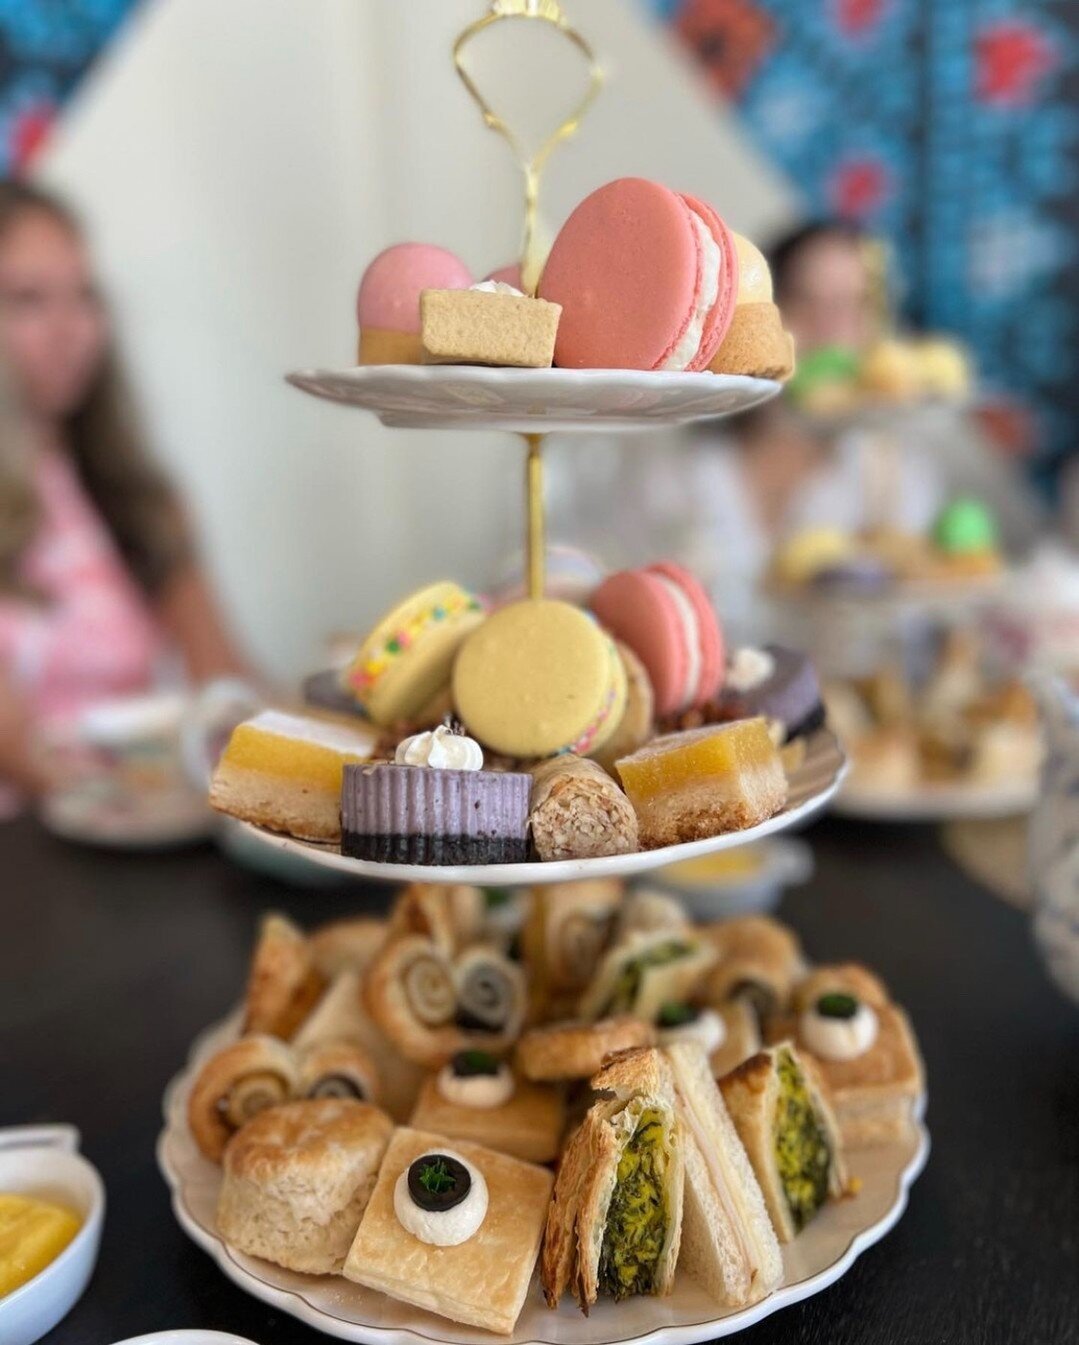 Tea for Tuesday? ☕ Thank you @cindyleanh for joining us for High Tea and sharing such kind words and beautiful photos! Reservations for our High Tea must be made 3 days in advance. Fill out our request form to reserve your spot through our #linkinbio